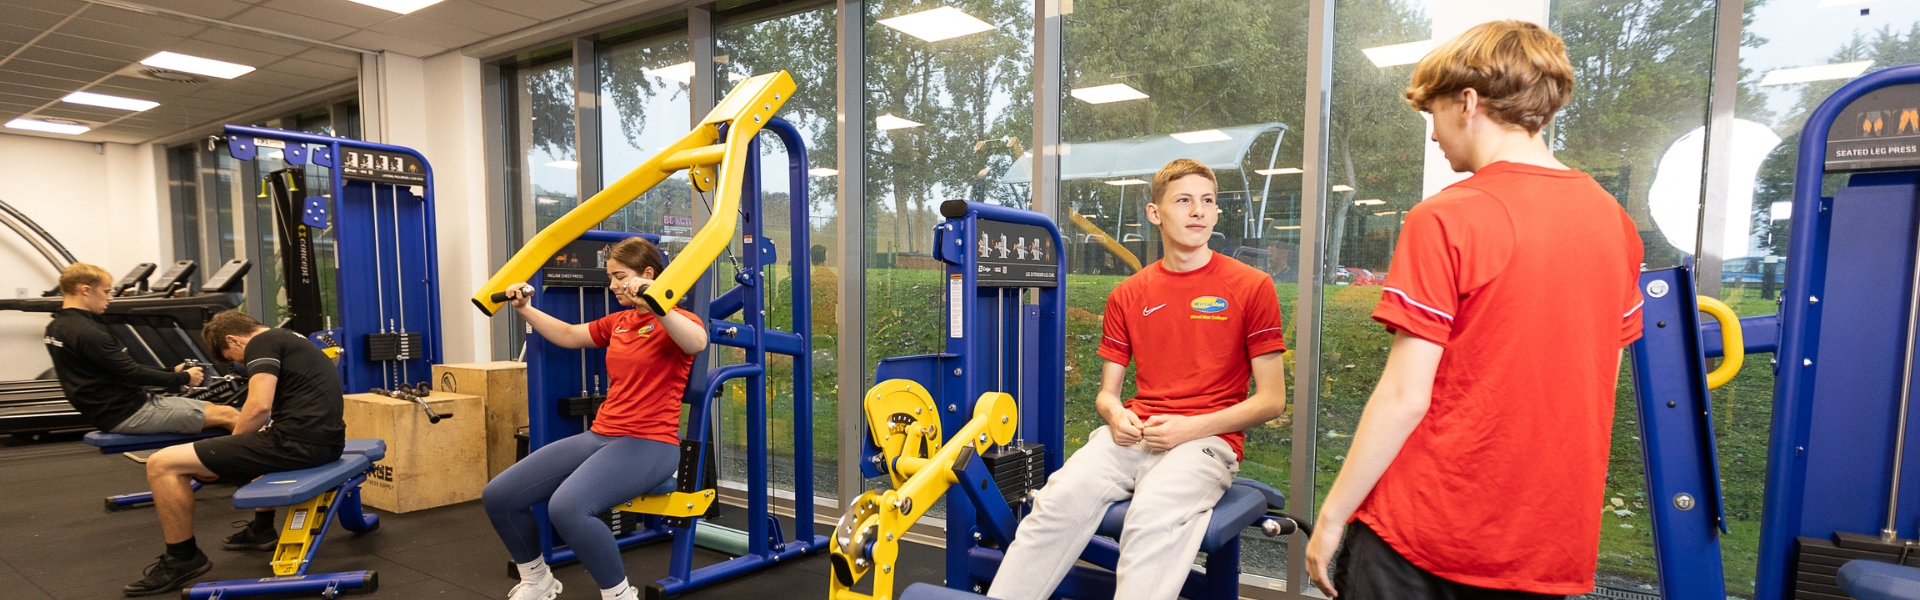 Fitness students working at the gym inside Oval campus